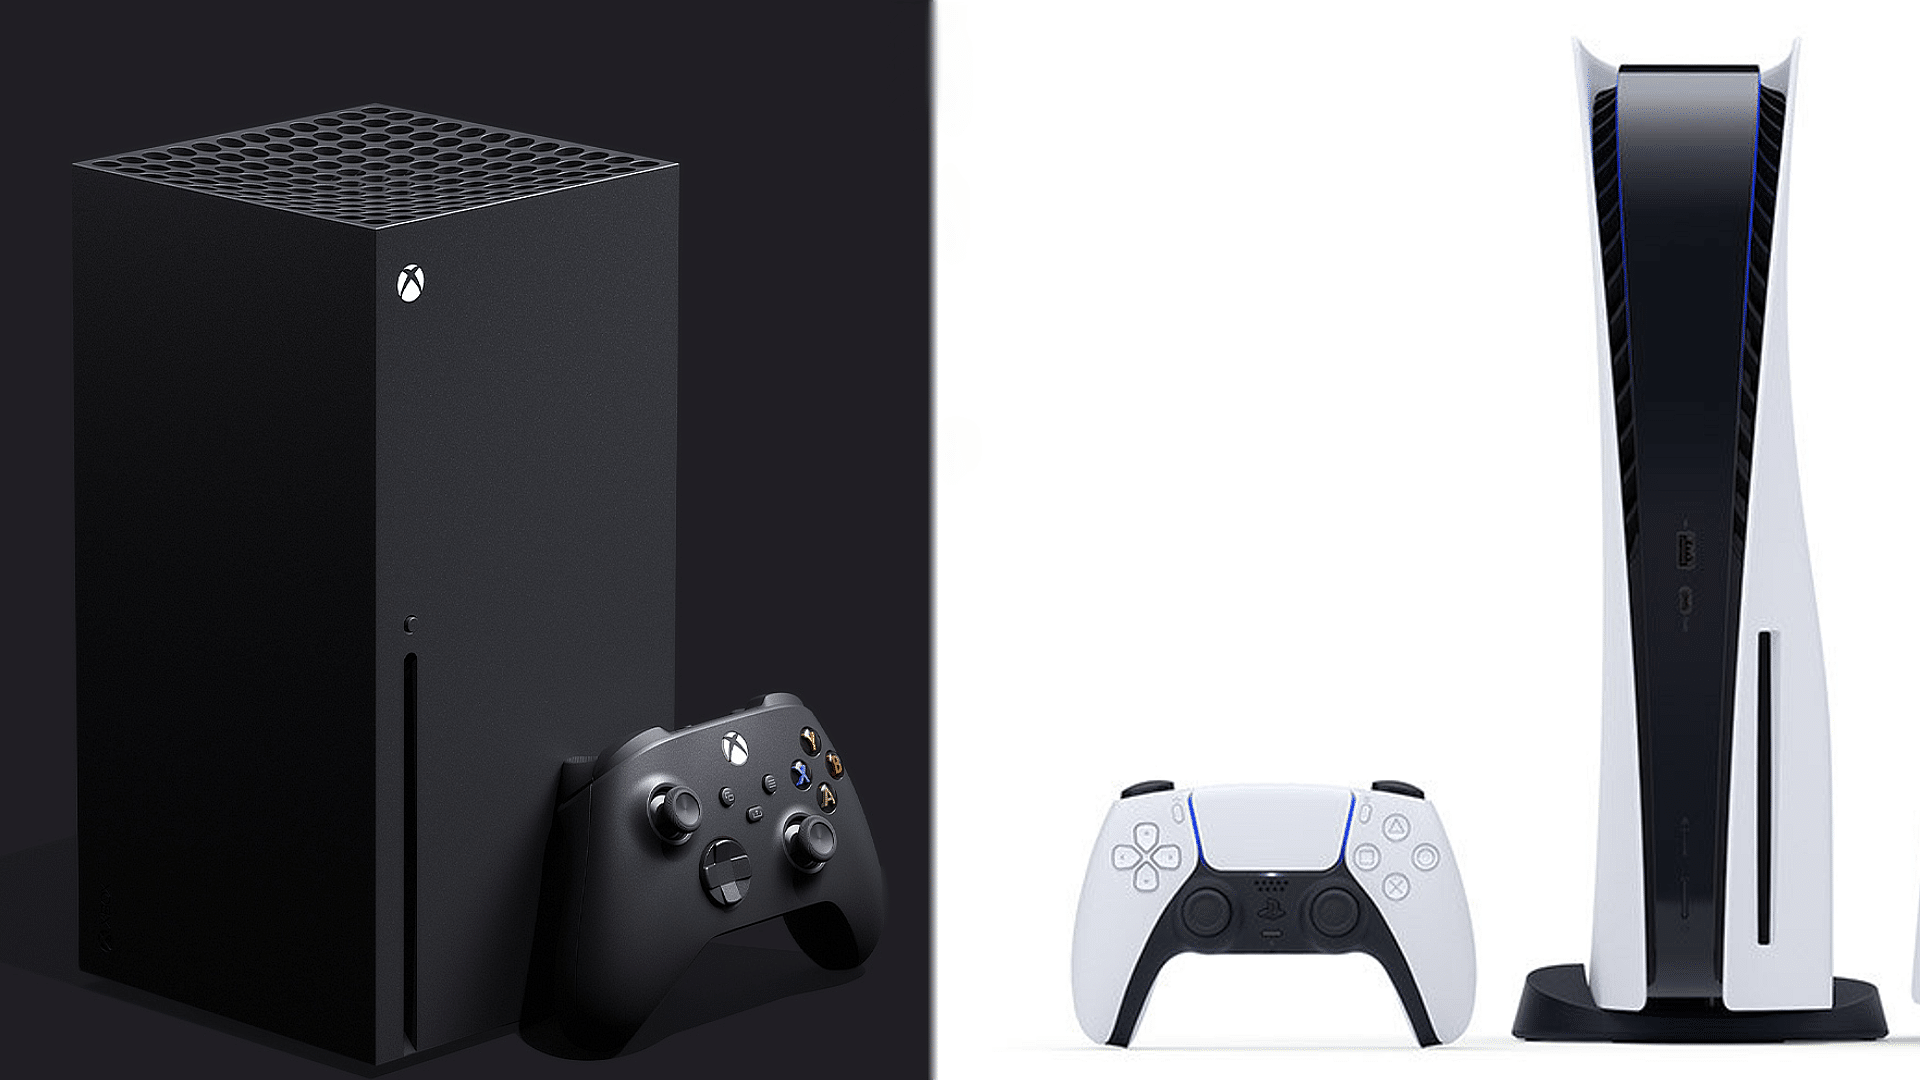 Reasons the Xbox Series X is Better Than the PS5